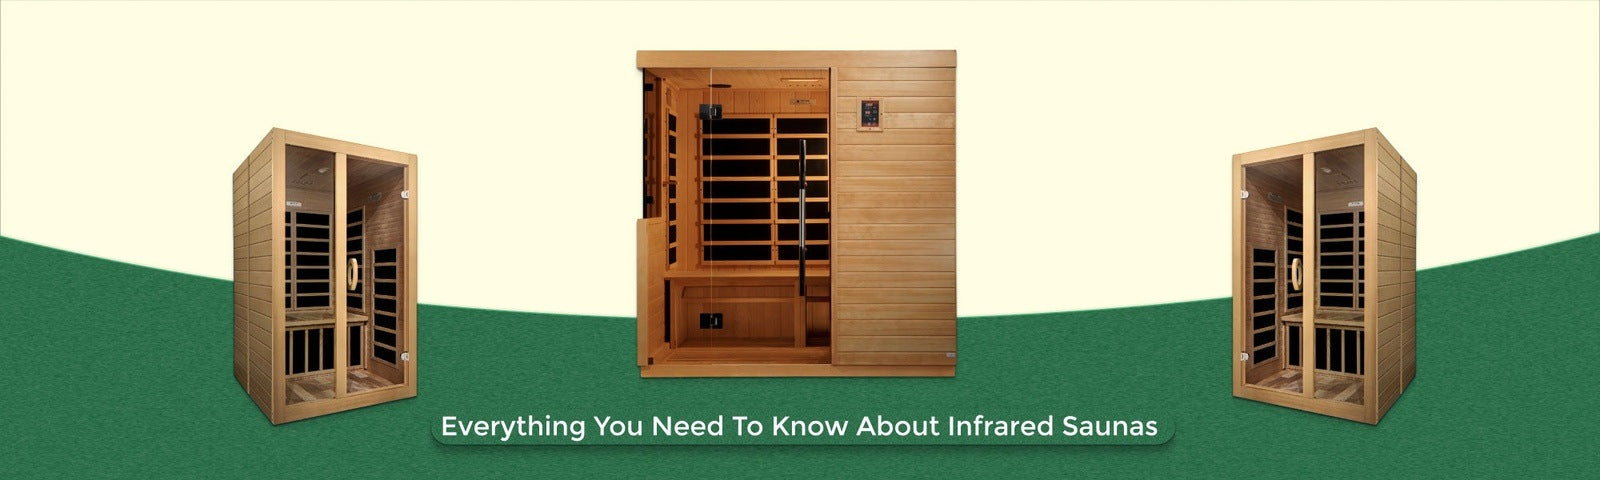 Everything You Need To Know About Infrared Saunas